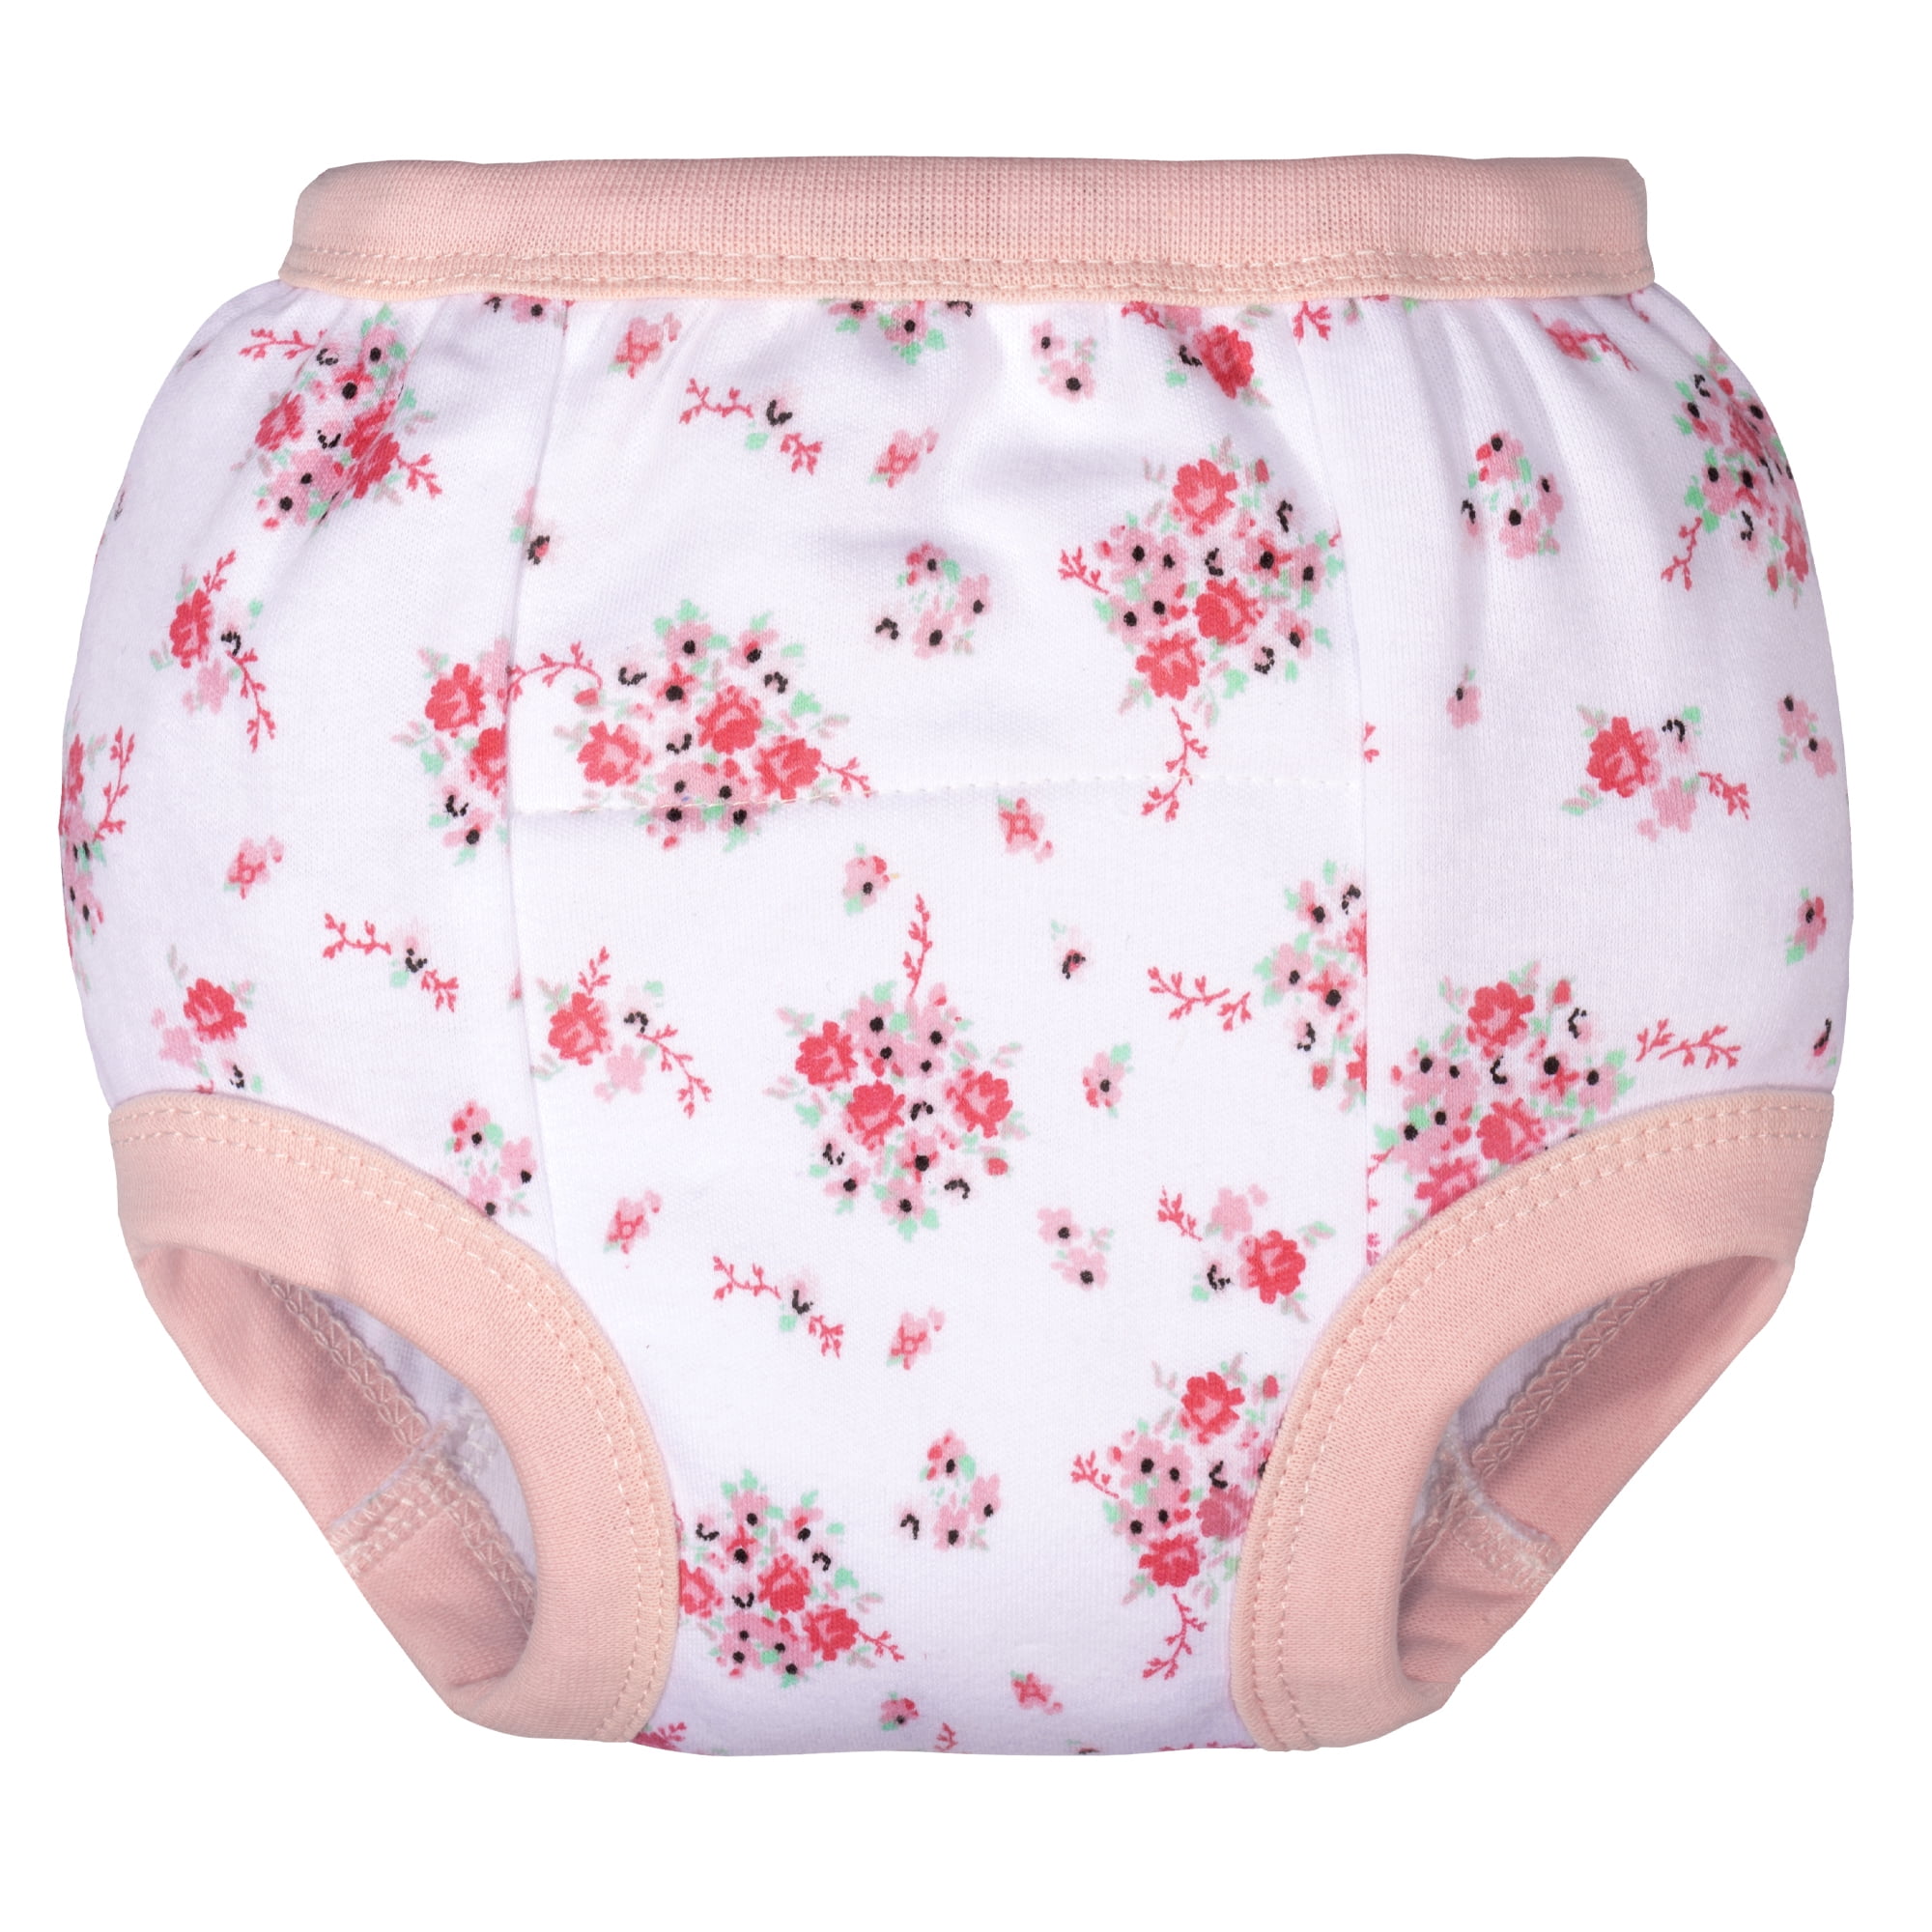 BIG ELEPHANT Baby Girls Training Underwear, Toddler Cotton Potty Training  Pants Soft Absorbent, 3T : Buy Online at Best Price in KSA - Souq is now  : Fashion